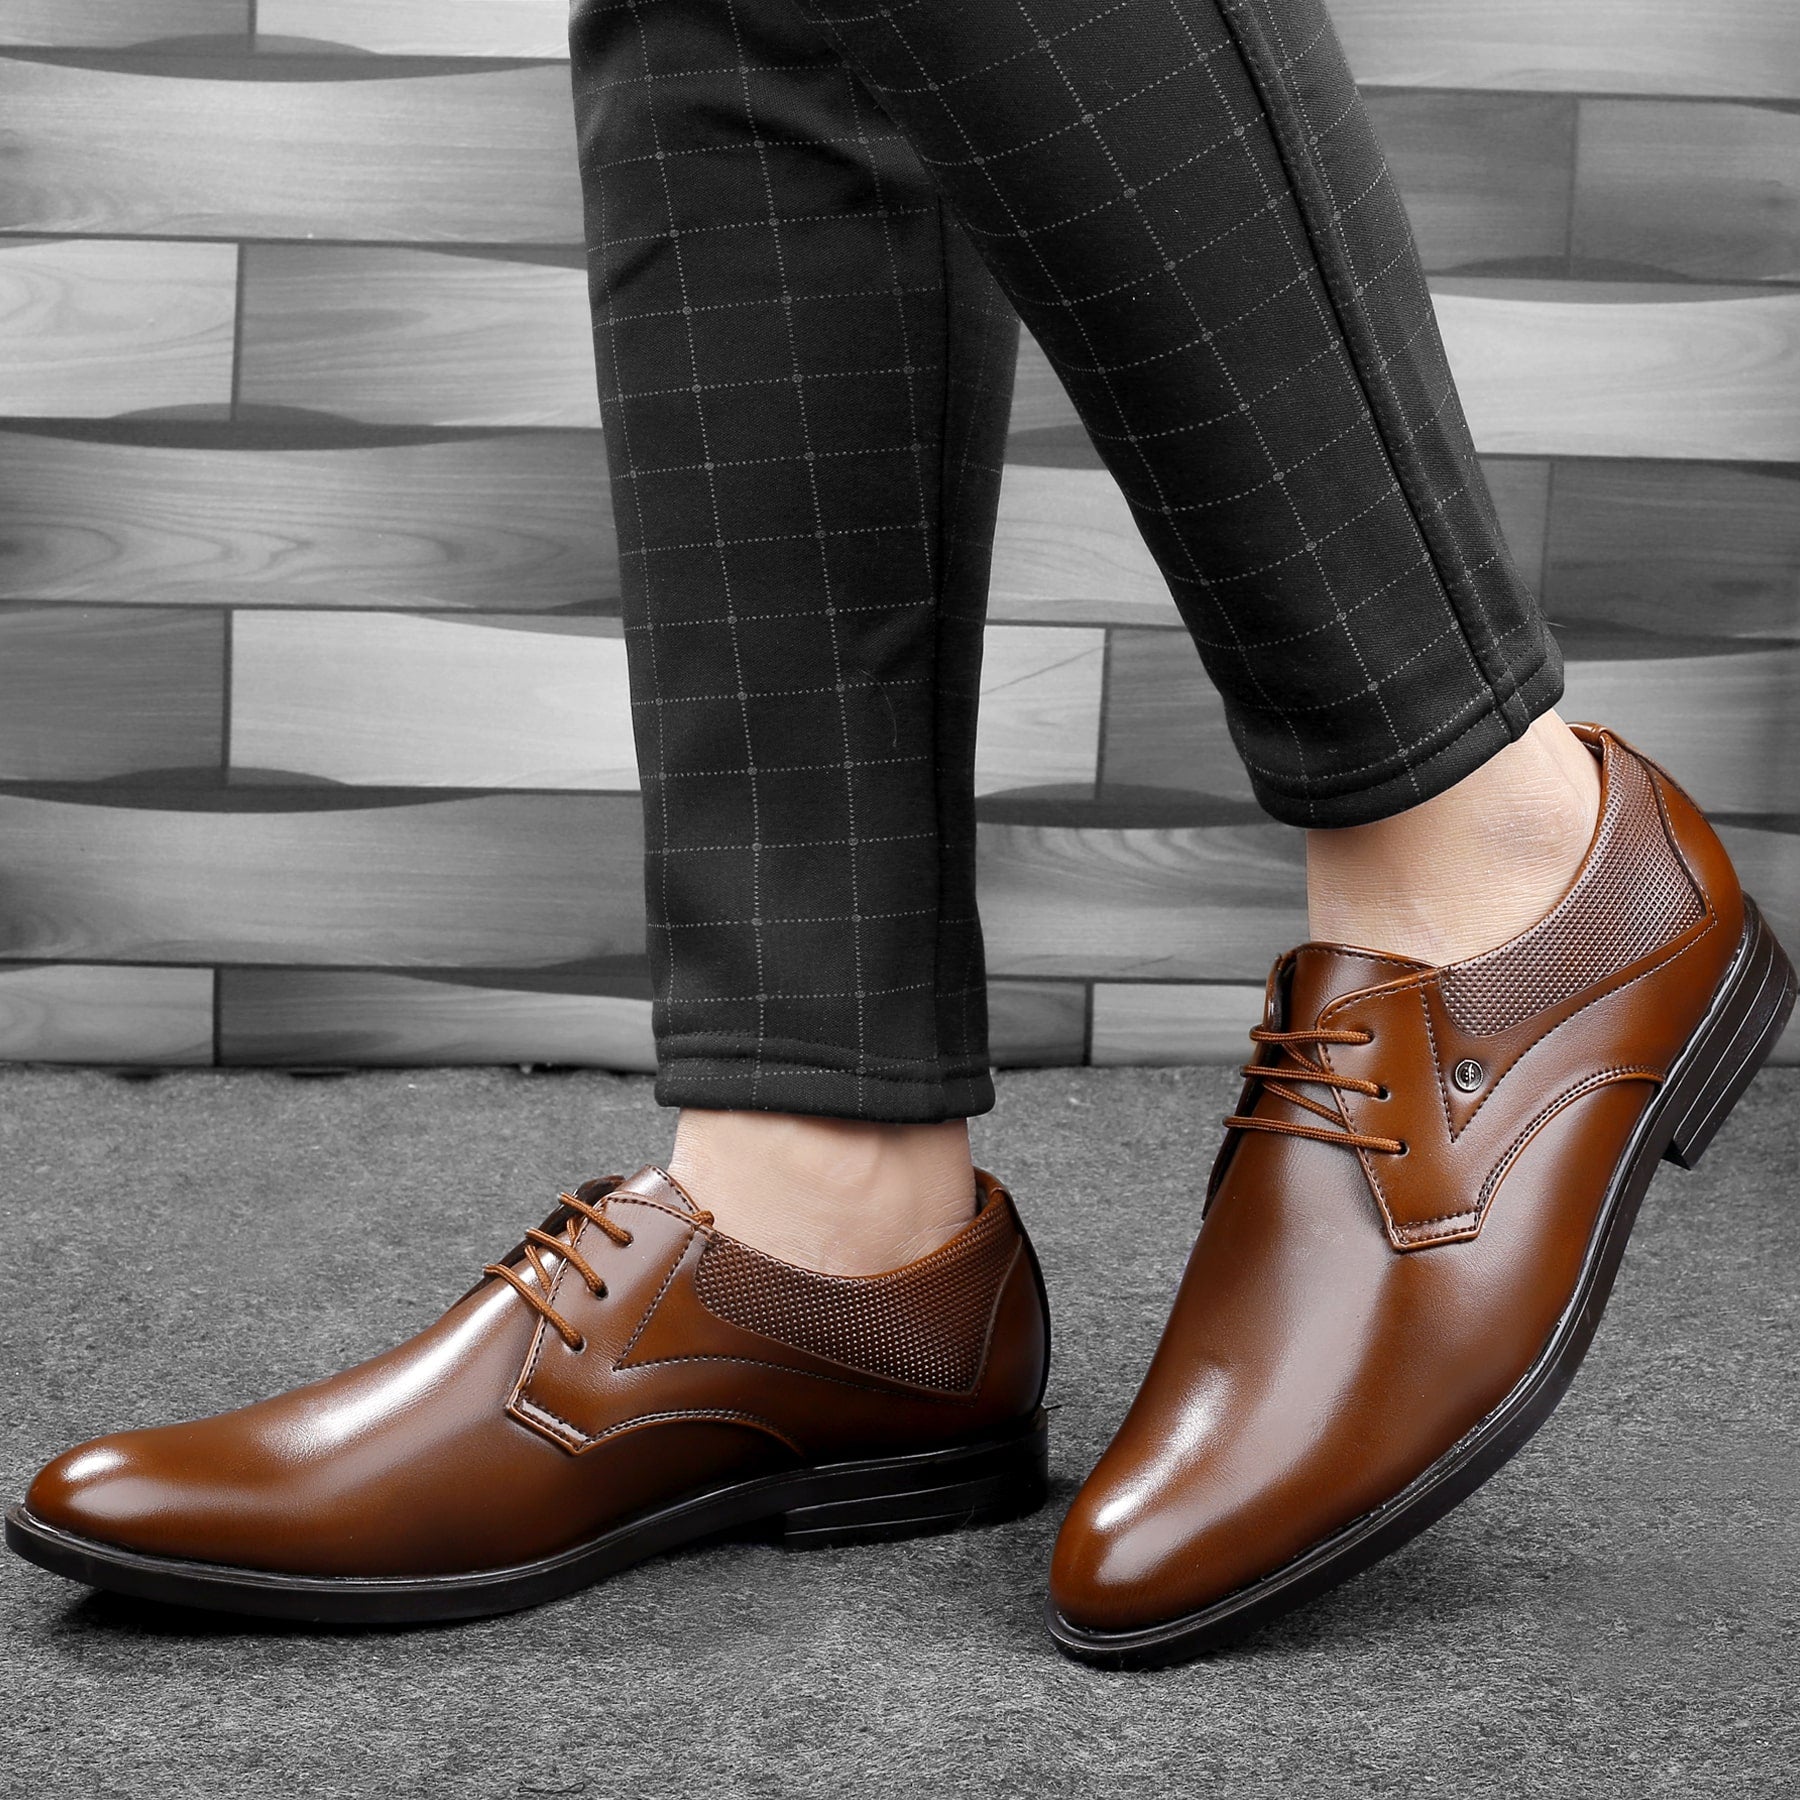 Bacca Bucci RICHMOND Formal Shoes with Superior Comfort | All Day Wear Office Or Party Lace-up Shoes